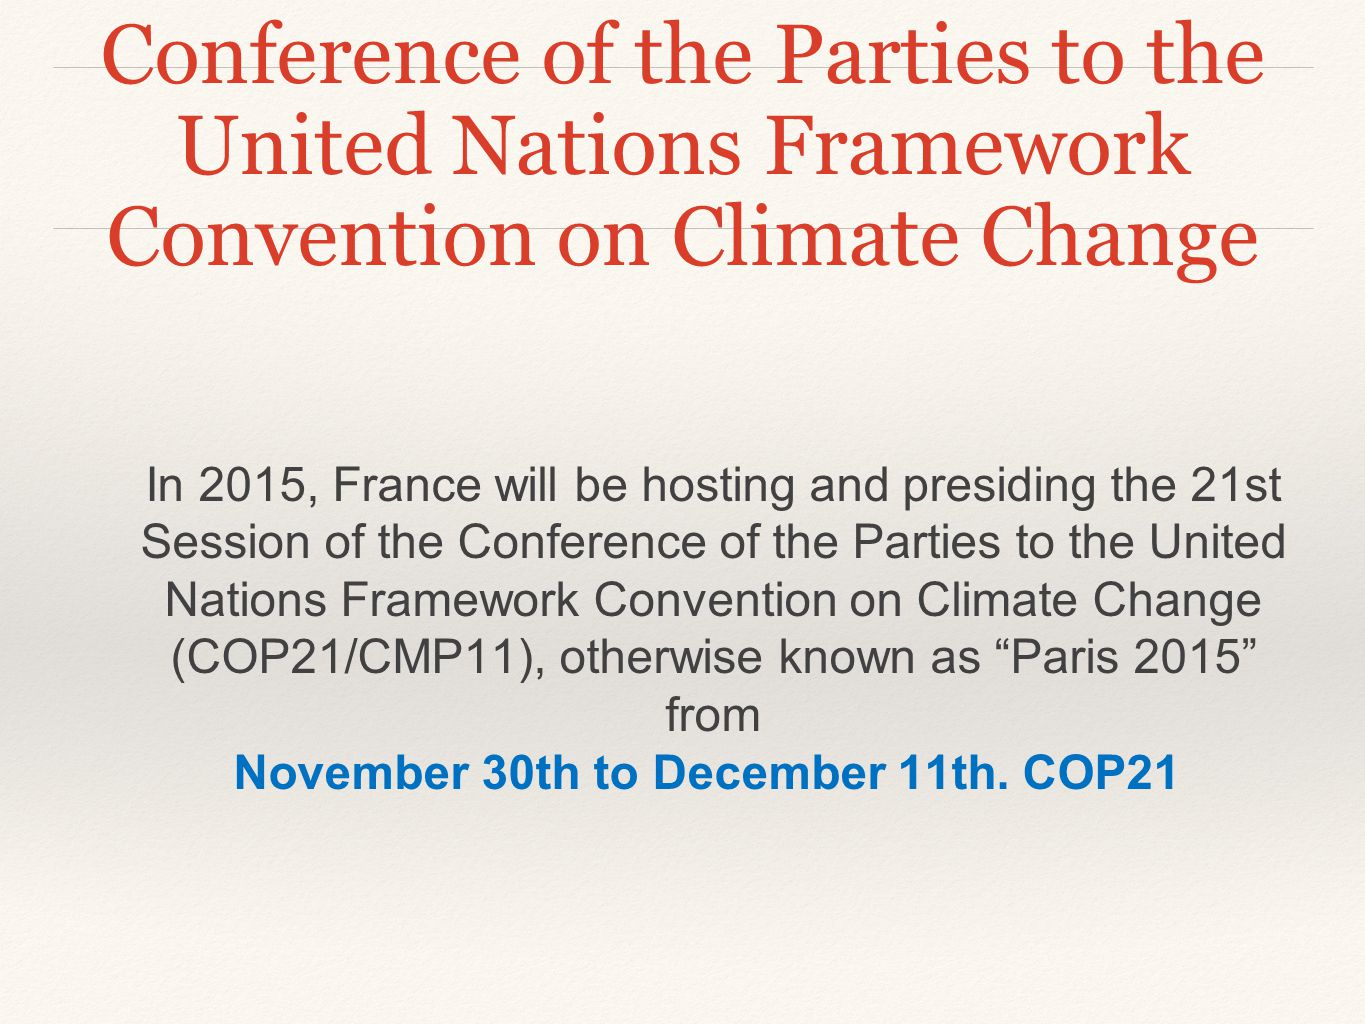 Conference of the Parties to the United Nations Framework Convention on Climate Change In 2015, France will be hosting and presiding the 21st Session of the Conference of the Parties to the United Nations Framework Convention on Climate Change (COP21/CMP11), otherwise known as Paris 2015 from November 30th to December 11th.